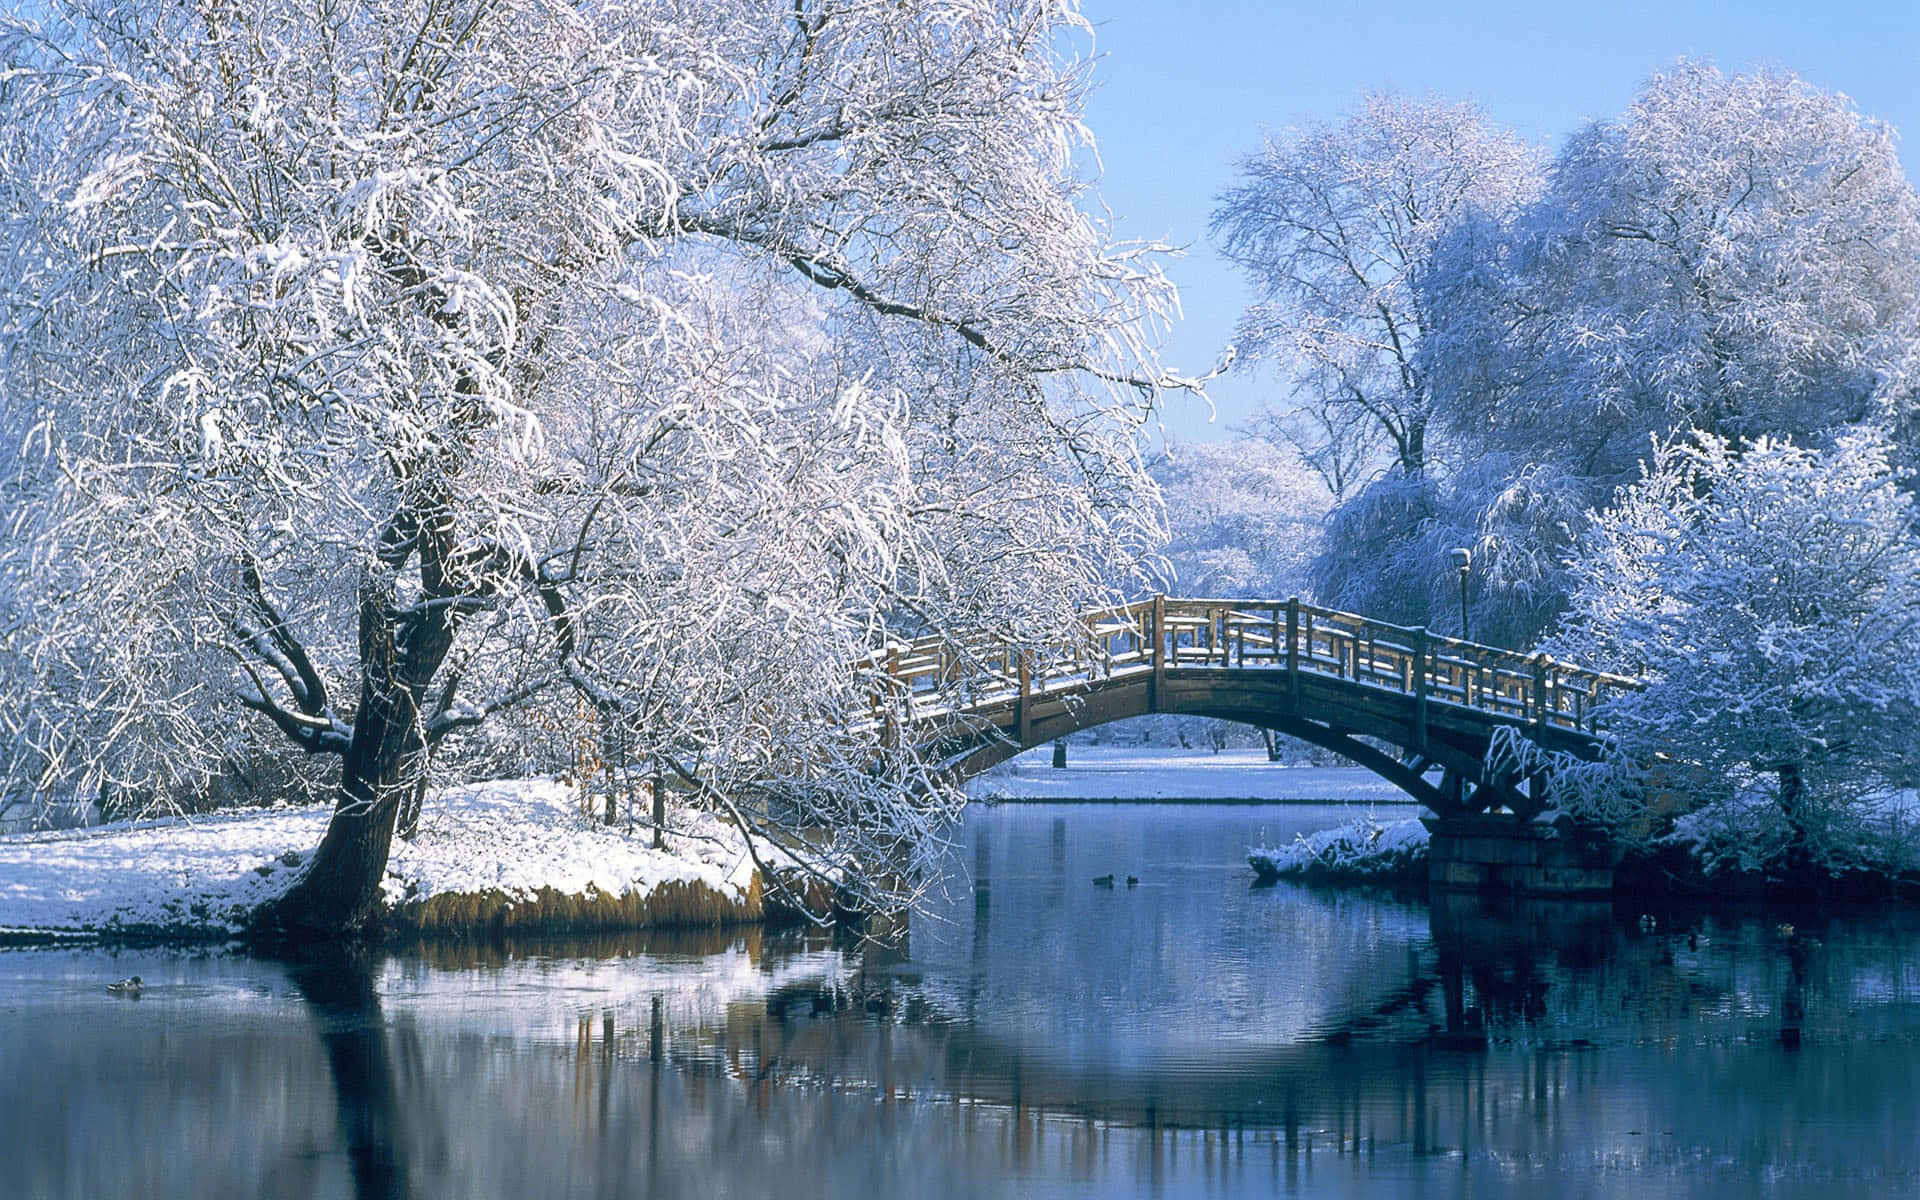 Enjoy picturesque winter weather surrounded by nature.